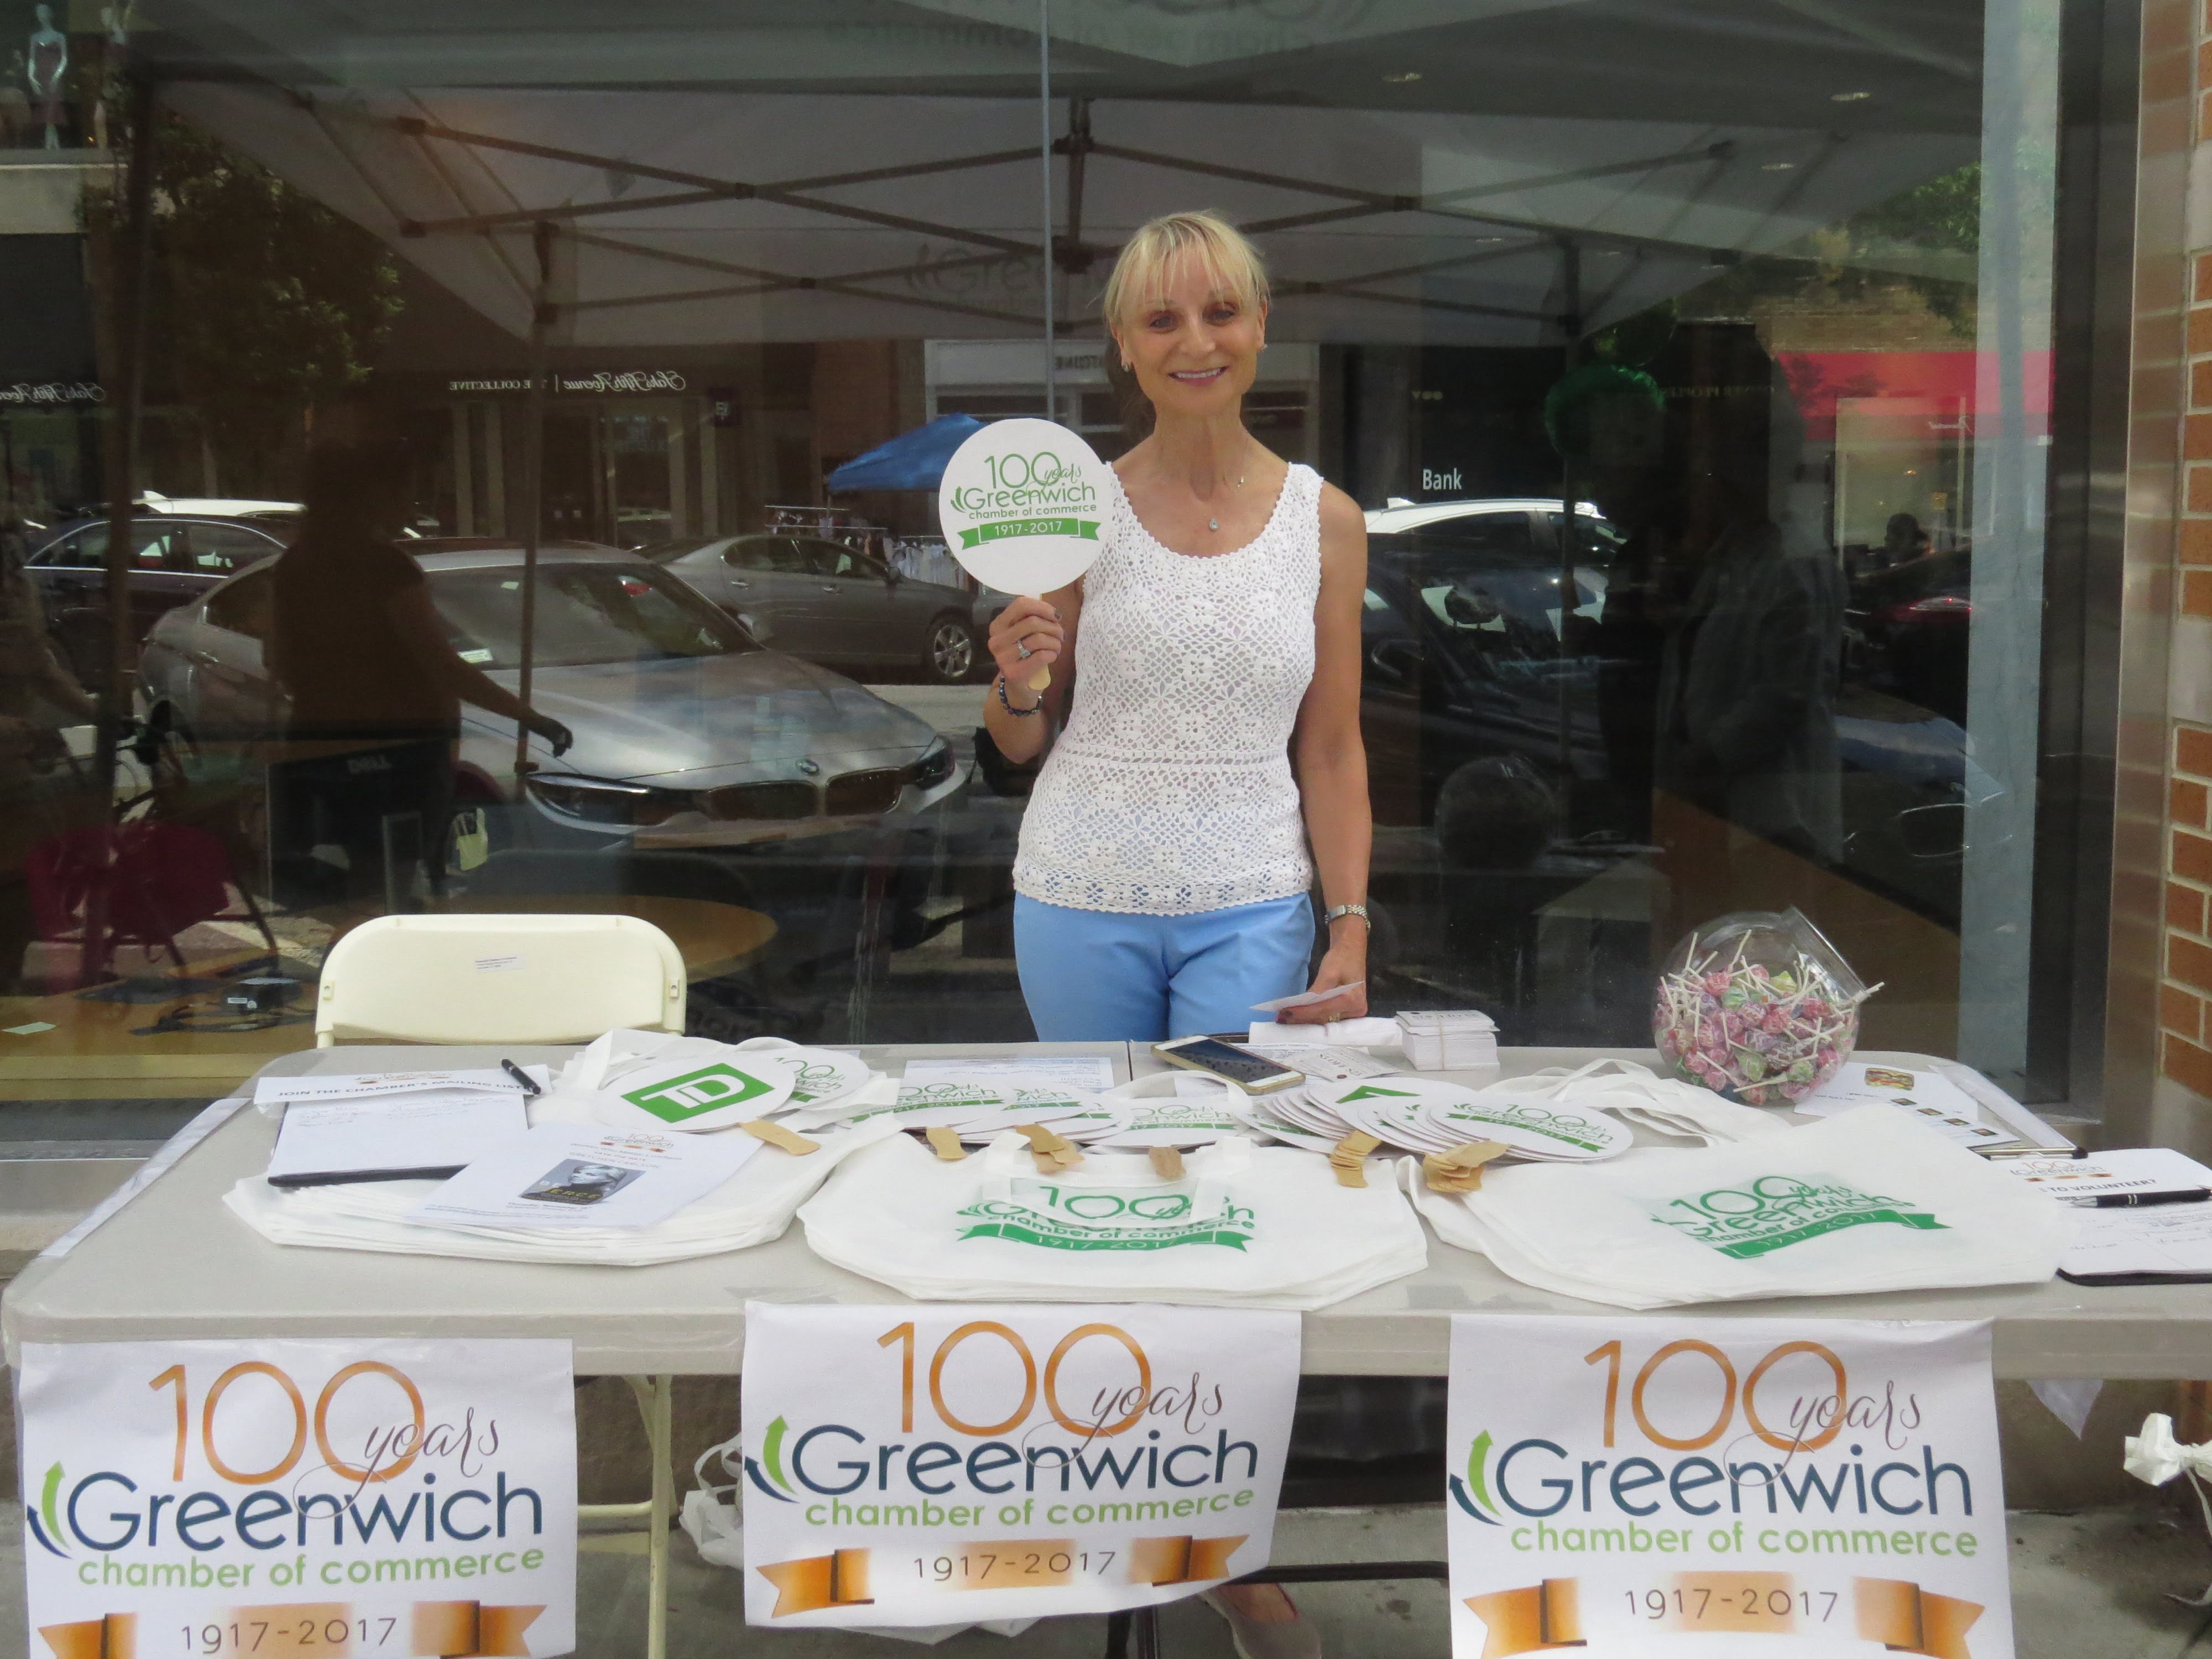 Marcia O'Kane, CEO of Greenwich Chamber of Commerce, stands outside TD Bank to give out fans for shoppers to keep cool in the heat. July 15, 2017. Photo: Devon Bedoya 